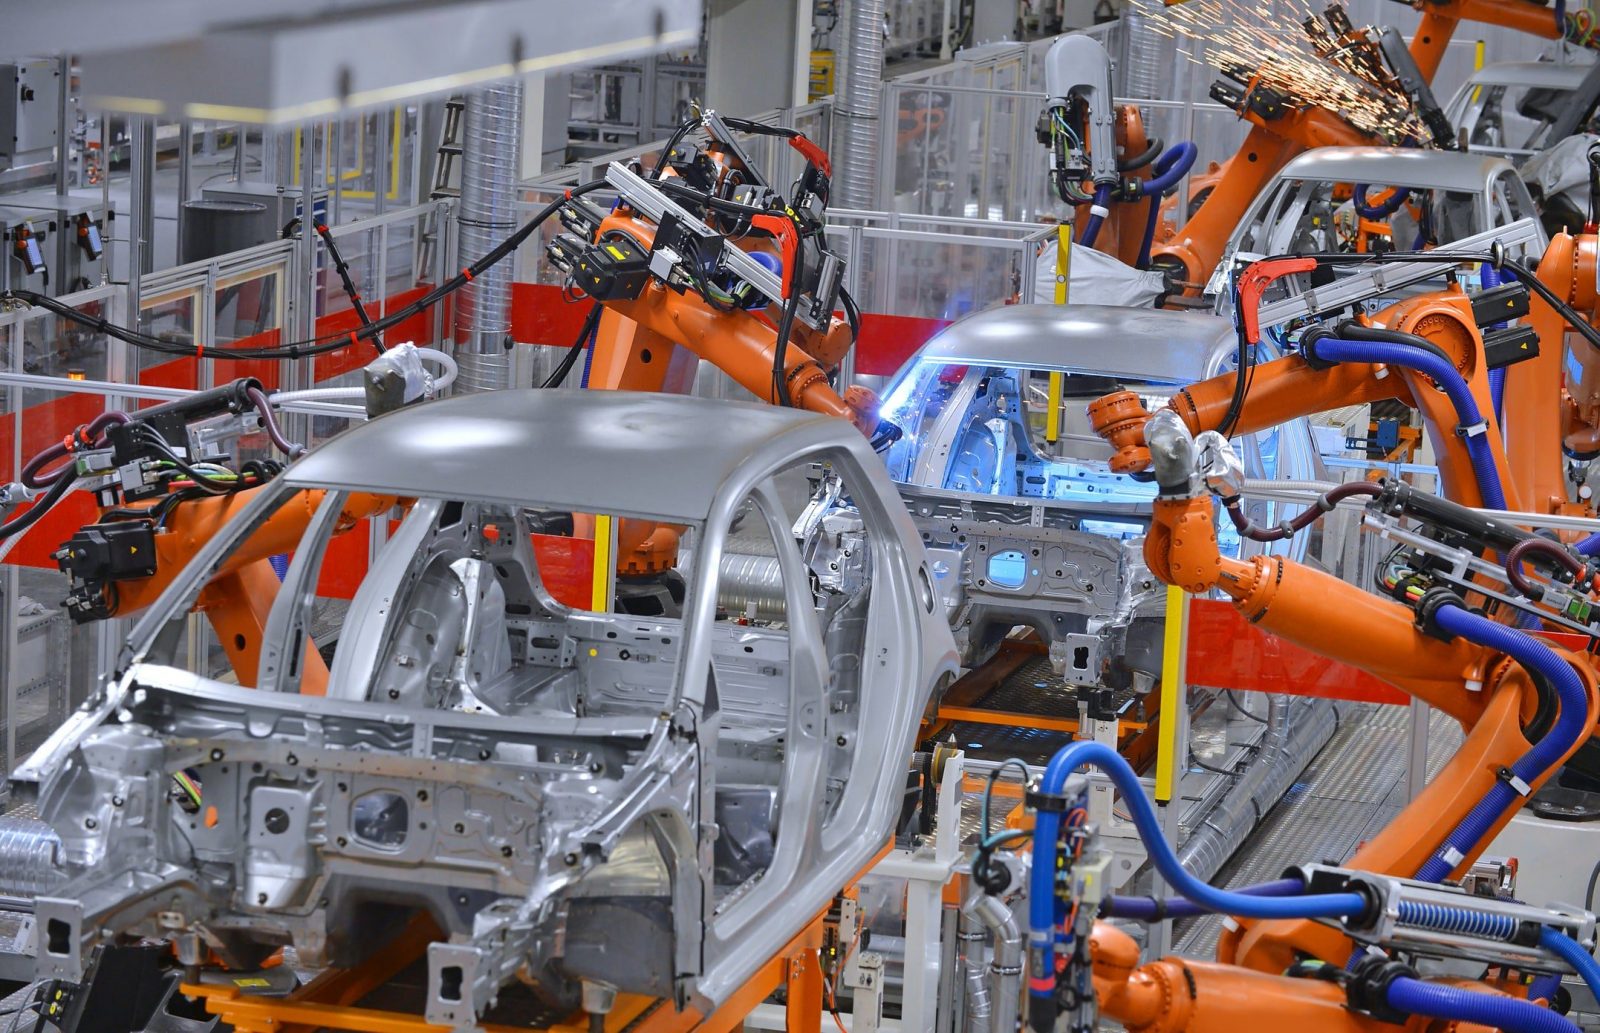 Background image: Autoliv robots welding in an automobile factory